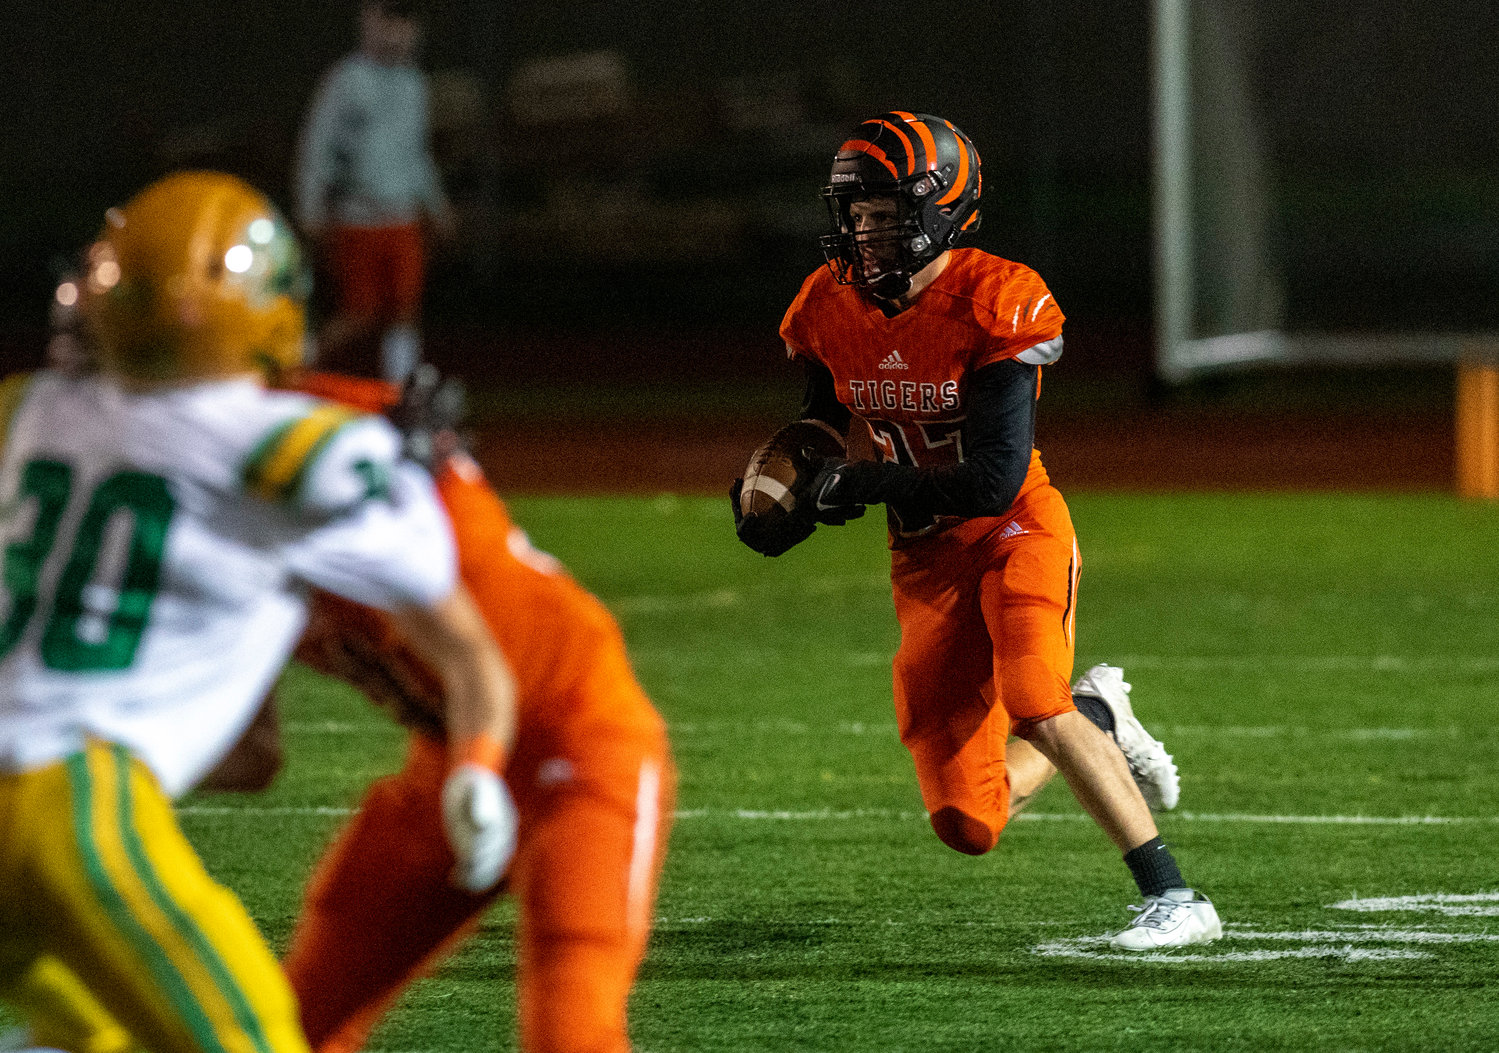 Centralia’s Anthony Saucedo (27) returns a kickoff against Tumwater Oct. 29.